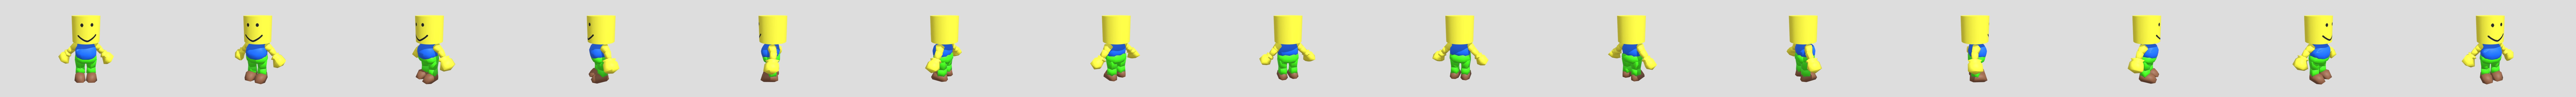 Oofio Model Remade - Download Free 3D model by 2mustapha.chebab7 (@2mustapha.chebab7)  [35be6dd]